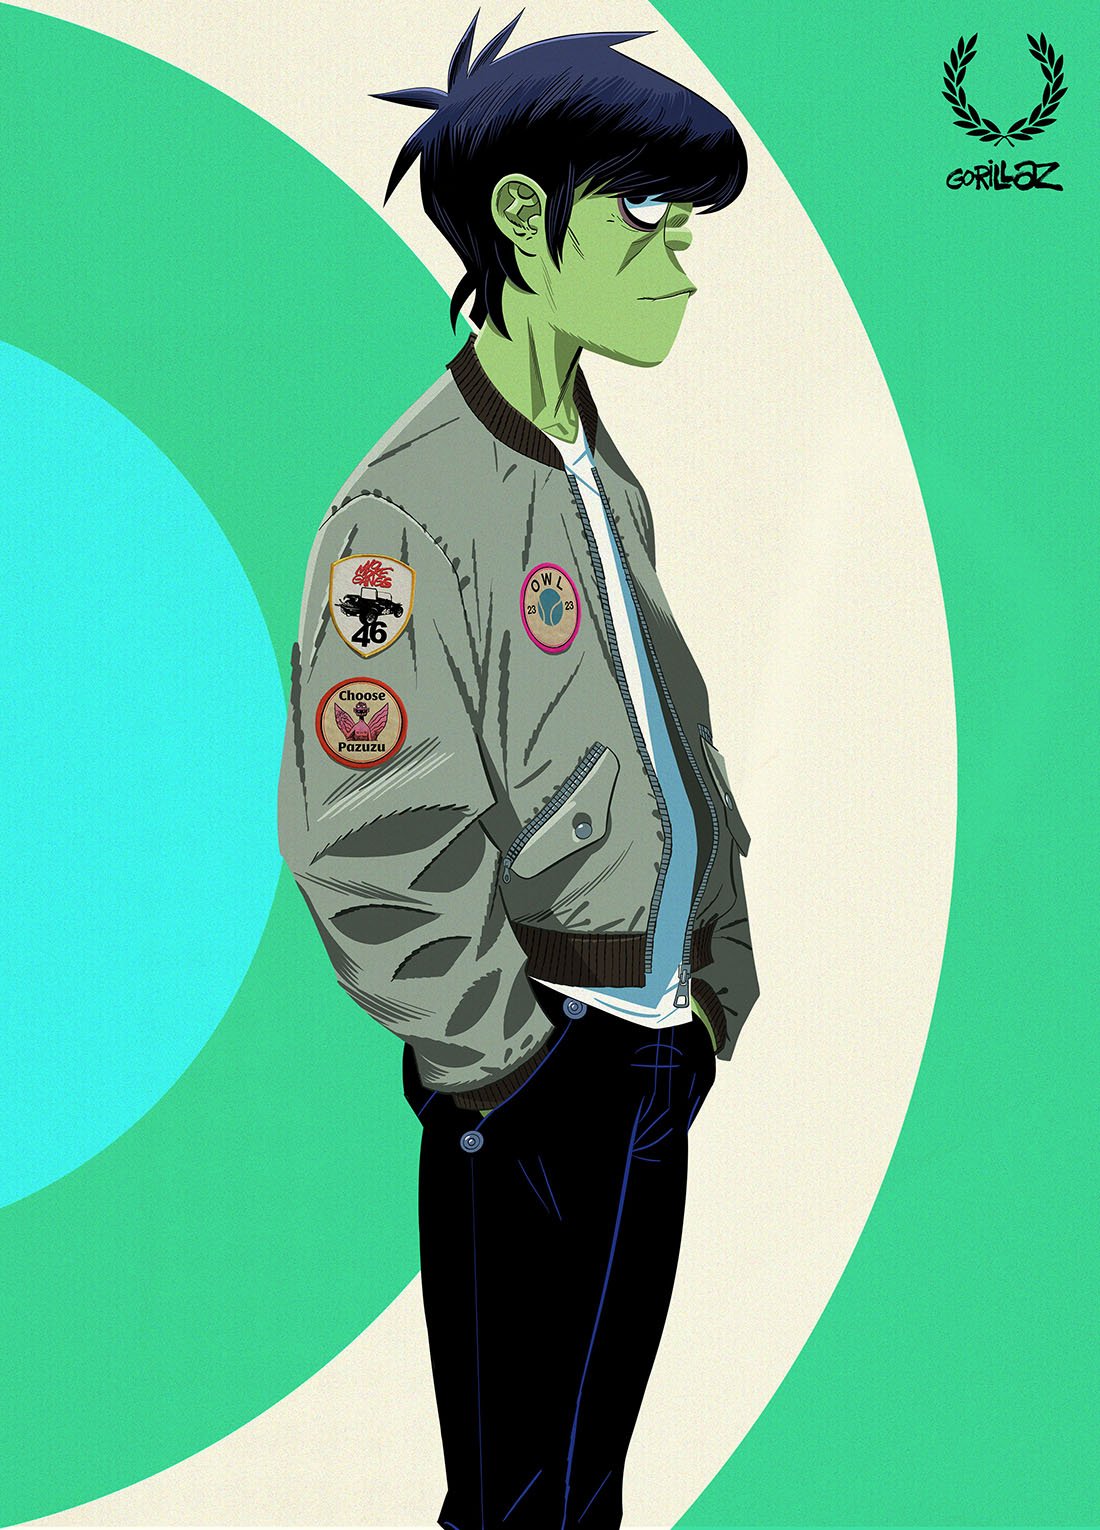 Fred Perry x Gorillaz Collection - Murdoc